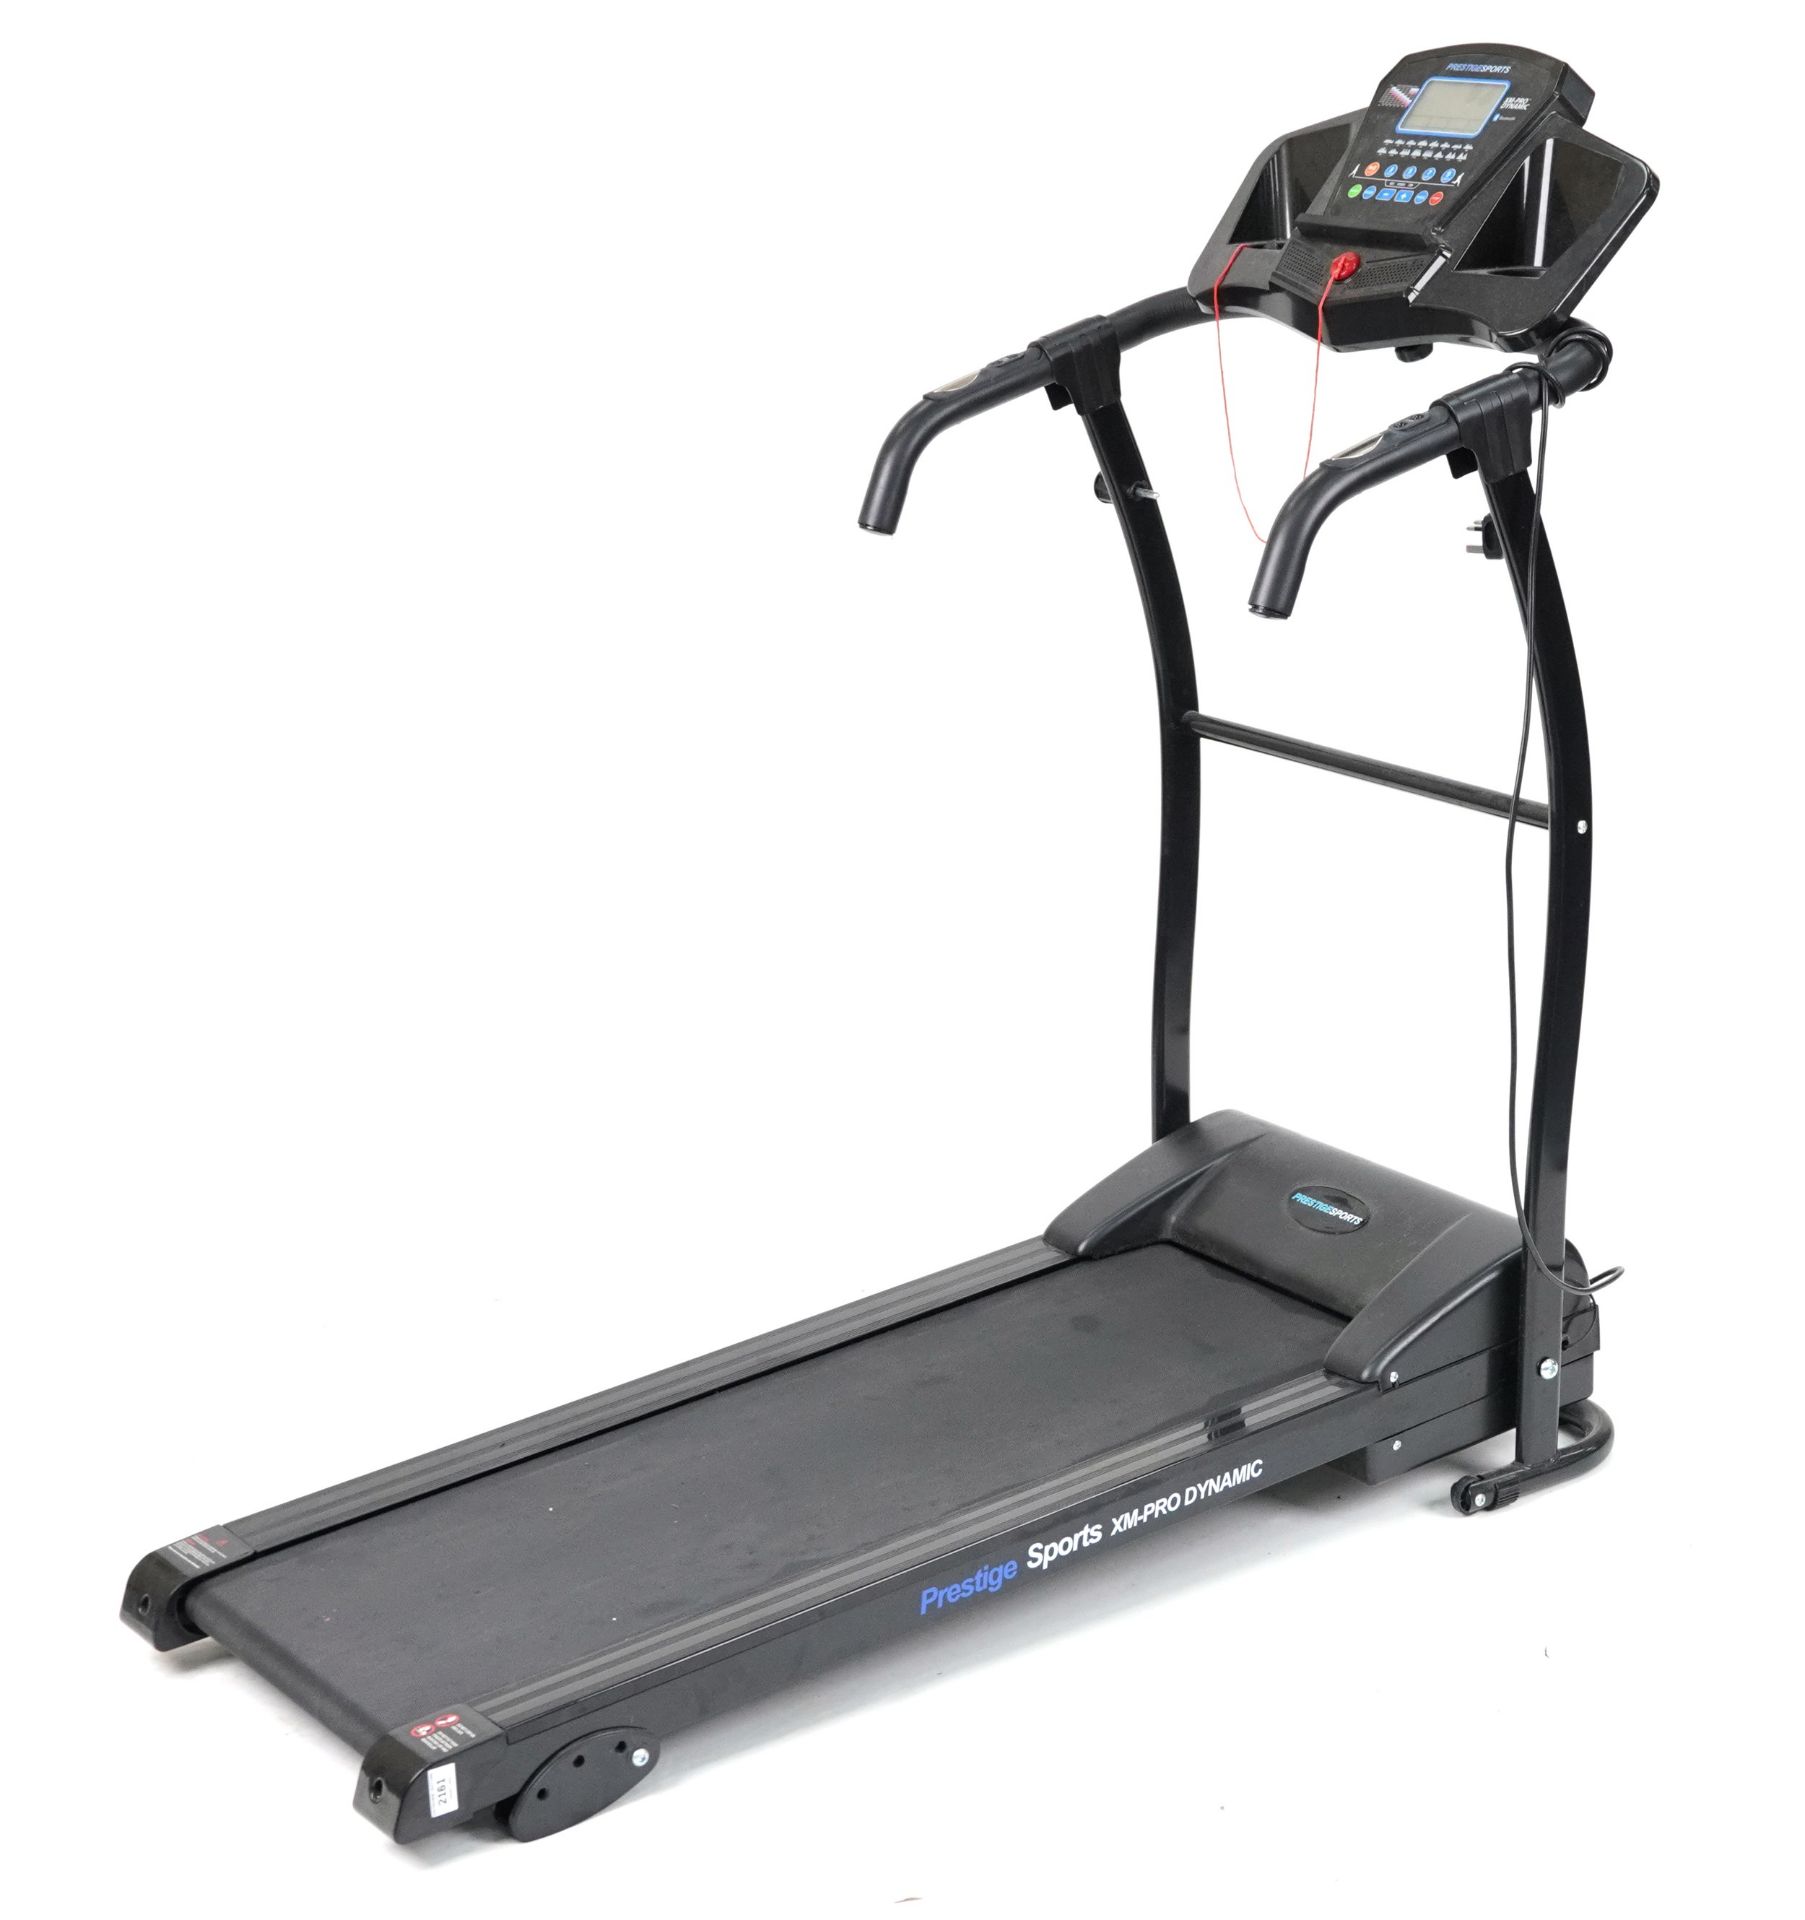 Prestige Sports XM-Pro Dynamic treadmill : For further information on this lot please visit www.